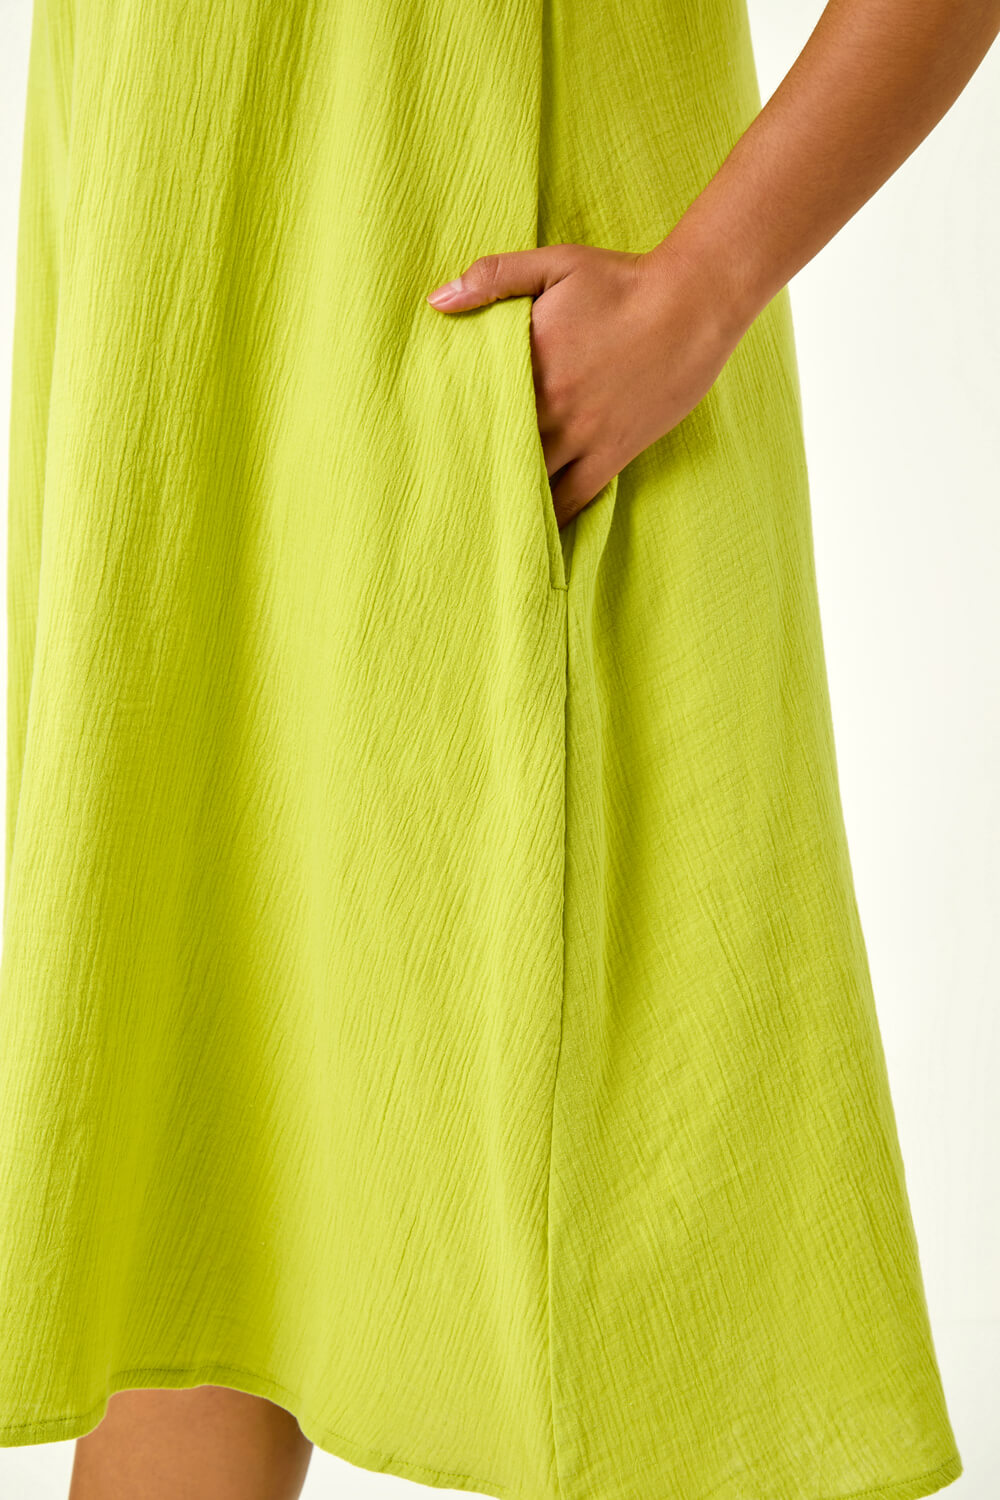 Lime Curve Strappy Cotton Pocket Dress, Image 5 of 5